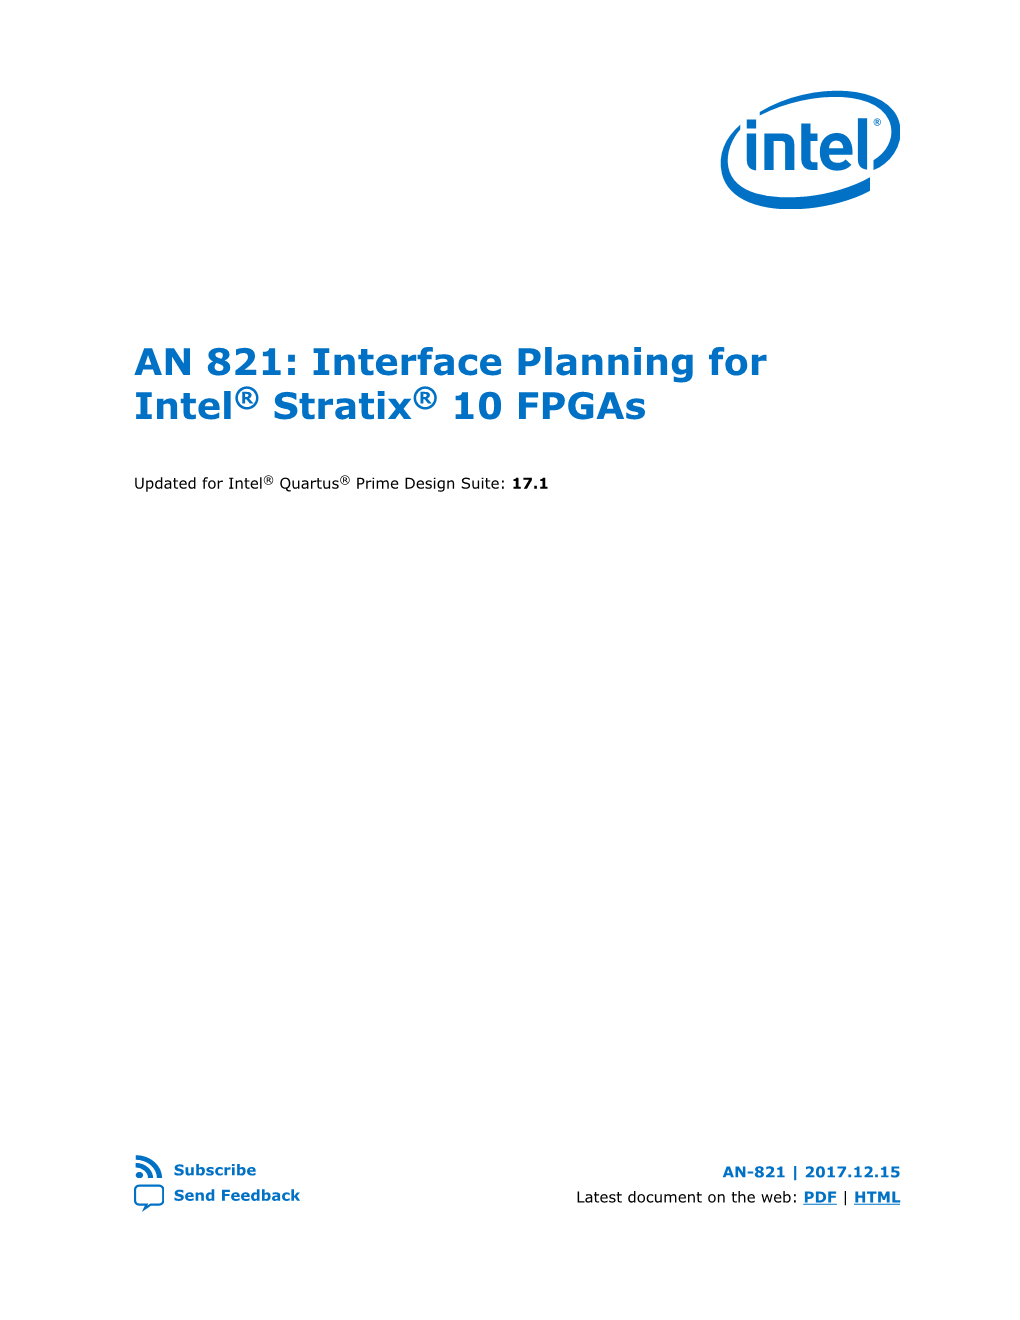 AN 821: Interface Planning for Intel® Stratix® 10 Fpgas